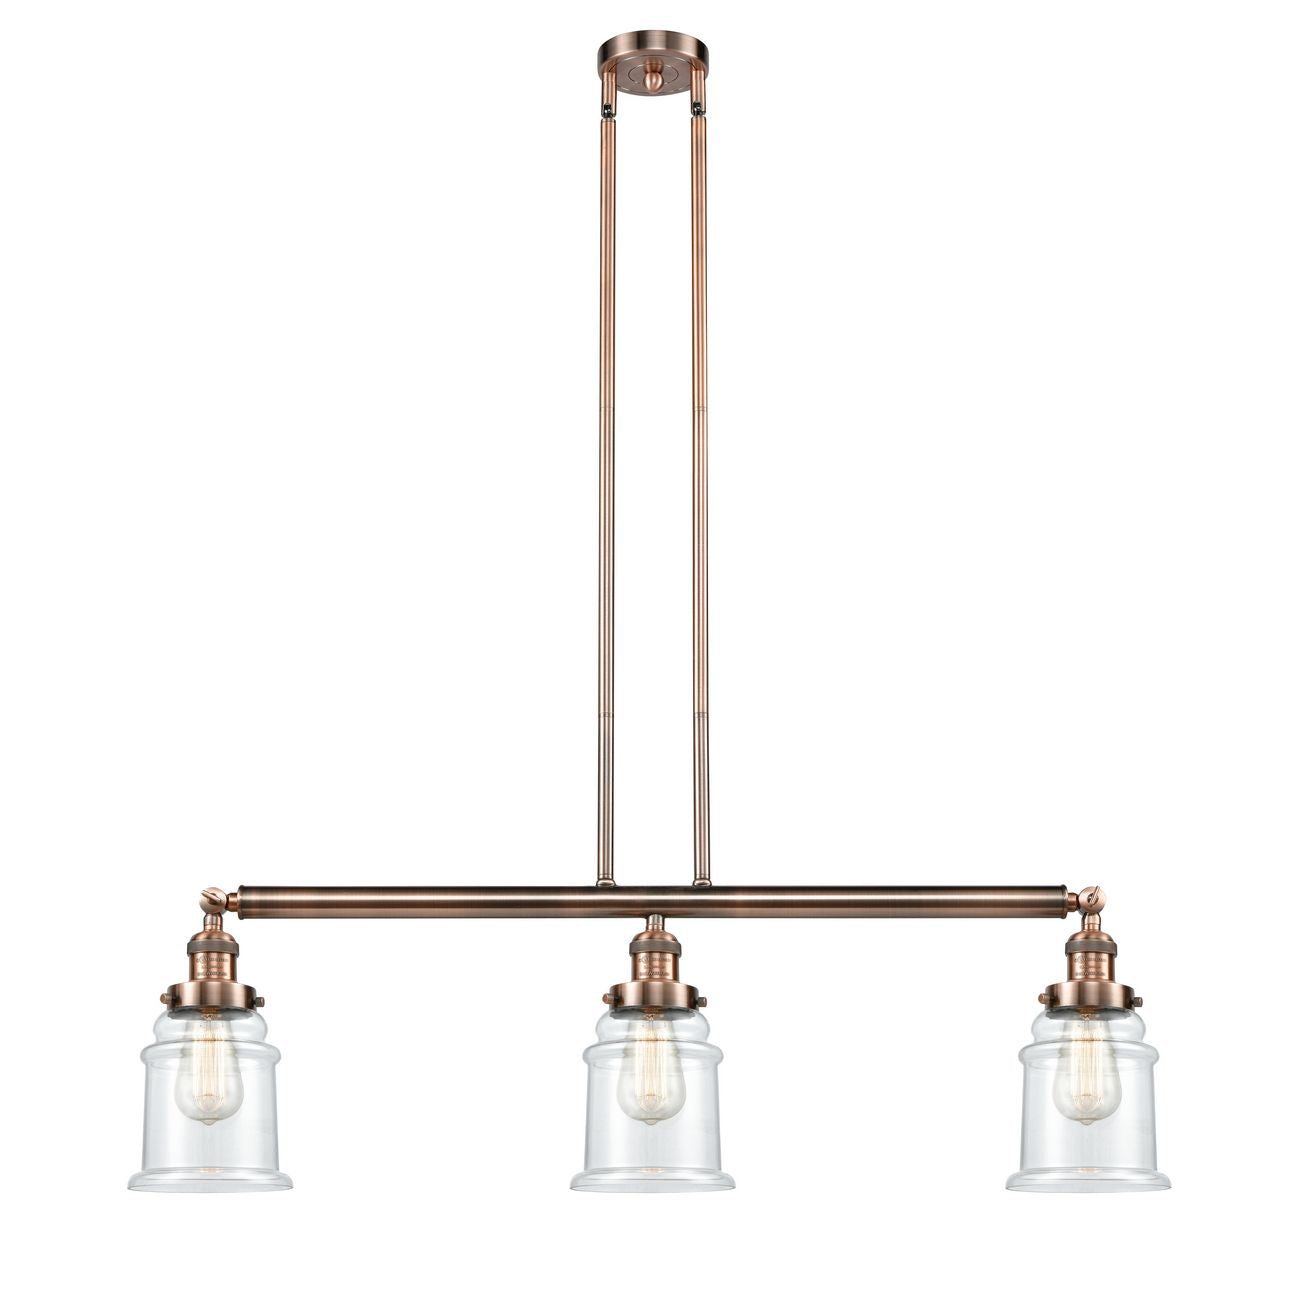 213-AC-G182 3-Light 38.5" Antique Copper Island Light - Clear Canton Glass - LED Bulb - Dimmensions: 38.5 x 6 x 11<br>Minimum Height : 21.5<br>Maximum Height : 45.5 - Sloped Ceiling Compatible: Yes